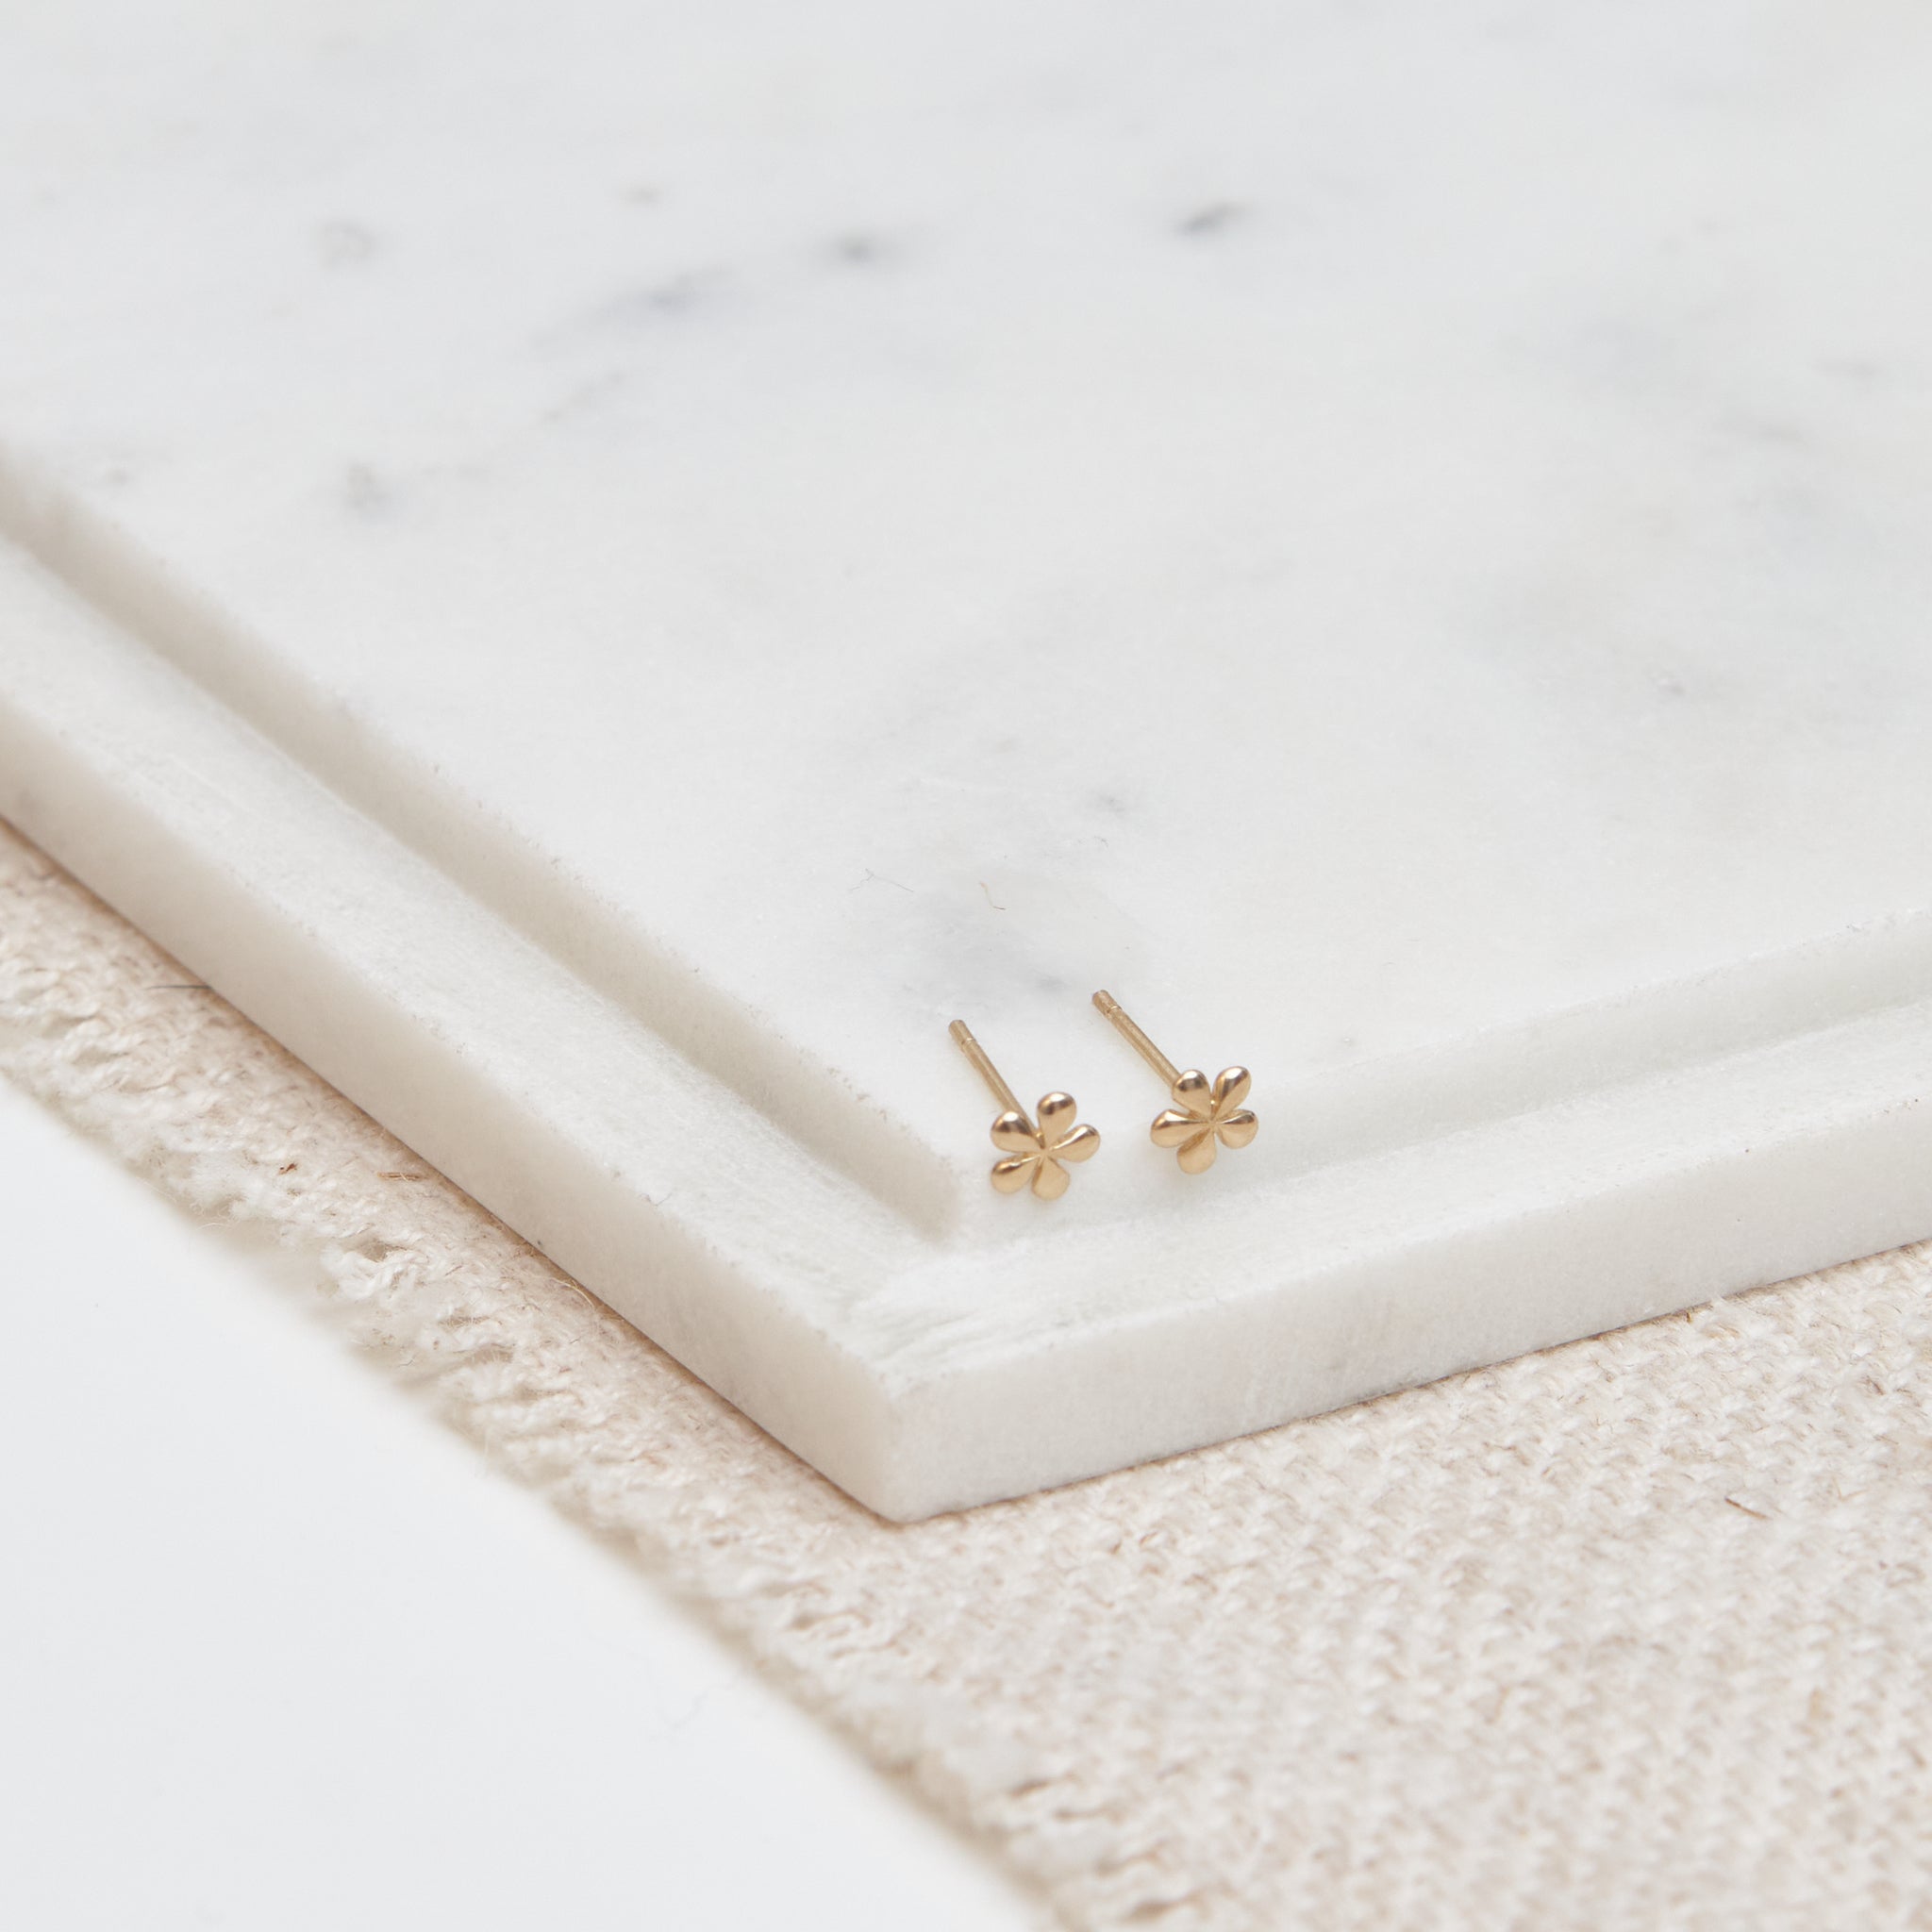 Daisy Studs - 14K Solid Gold